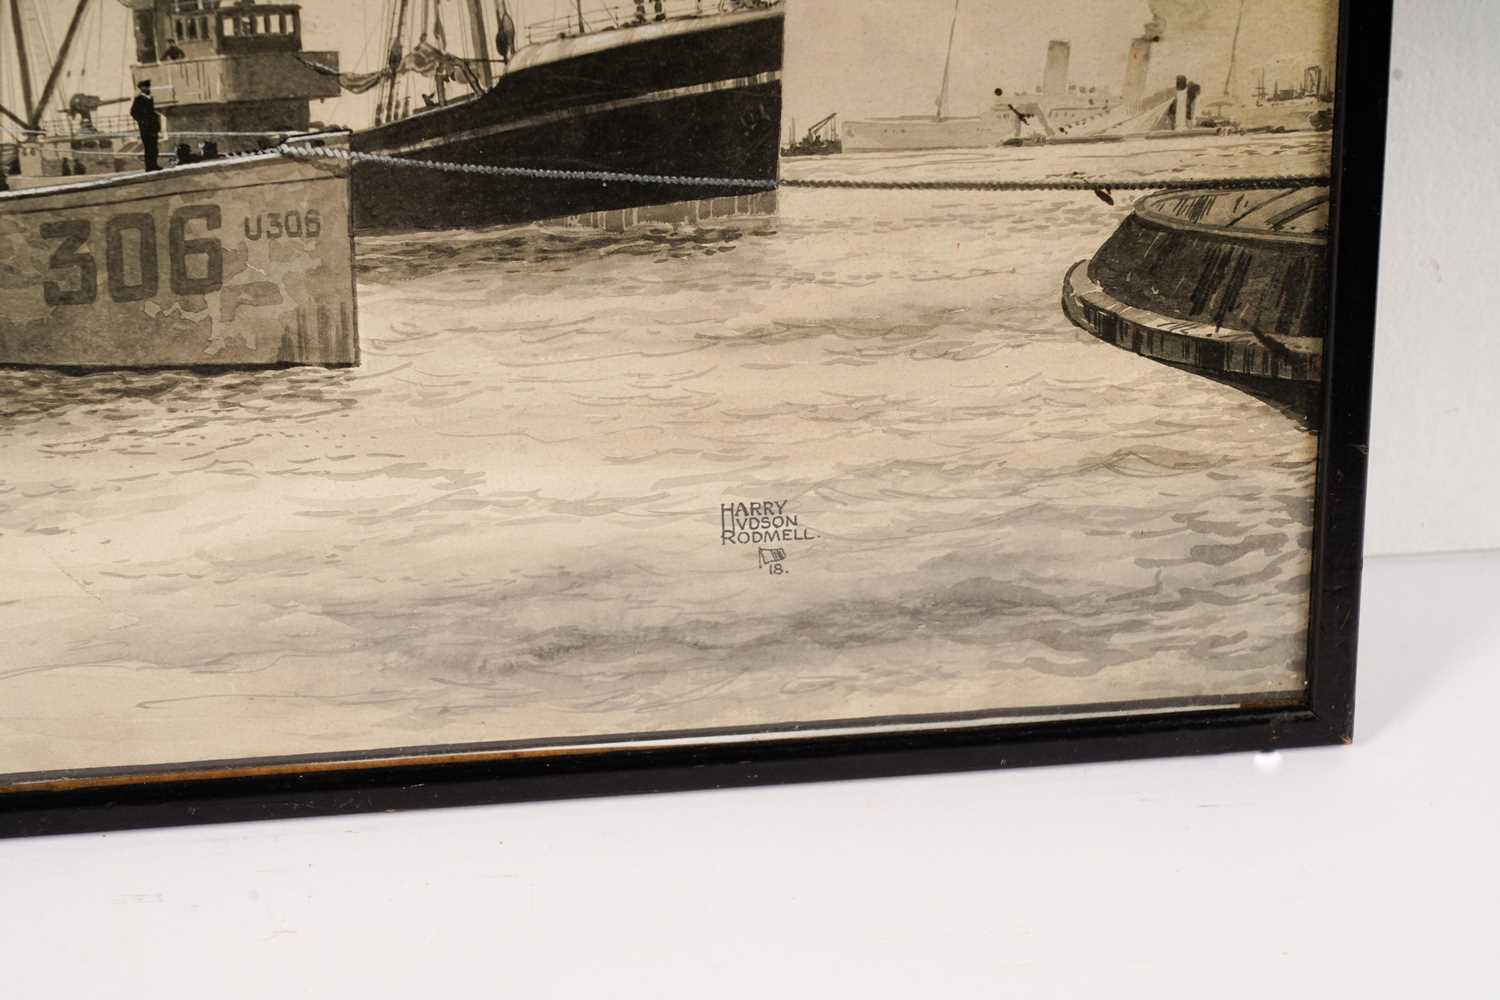 Harry Hudson Rodmell - German Submarine Captured and Brought into Port | watercolour - Image 2 of 4